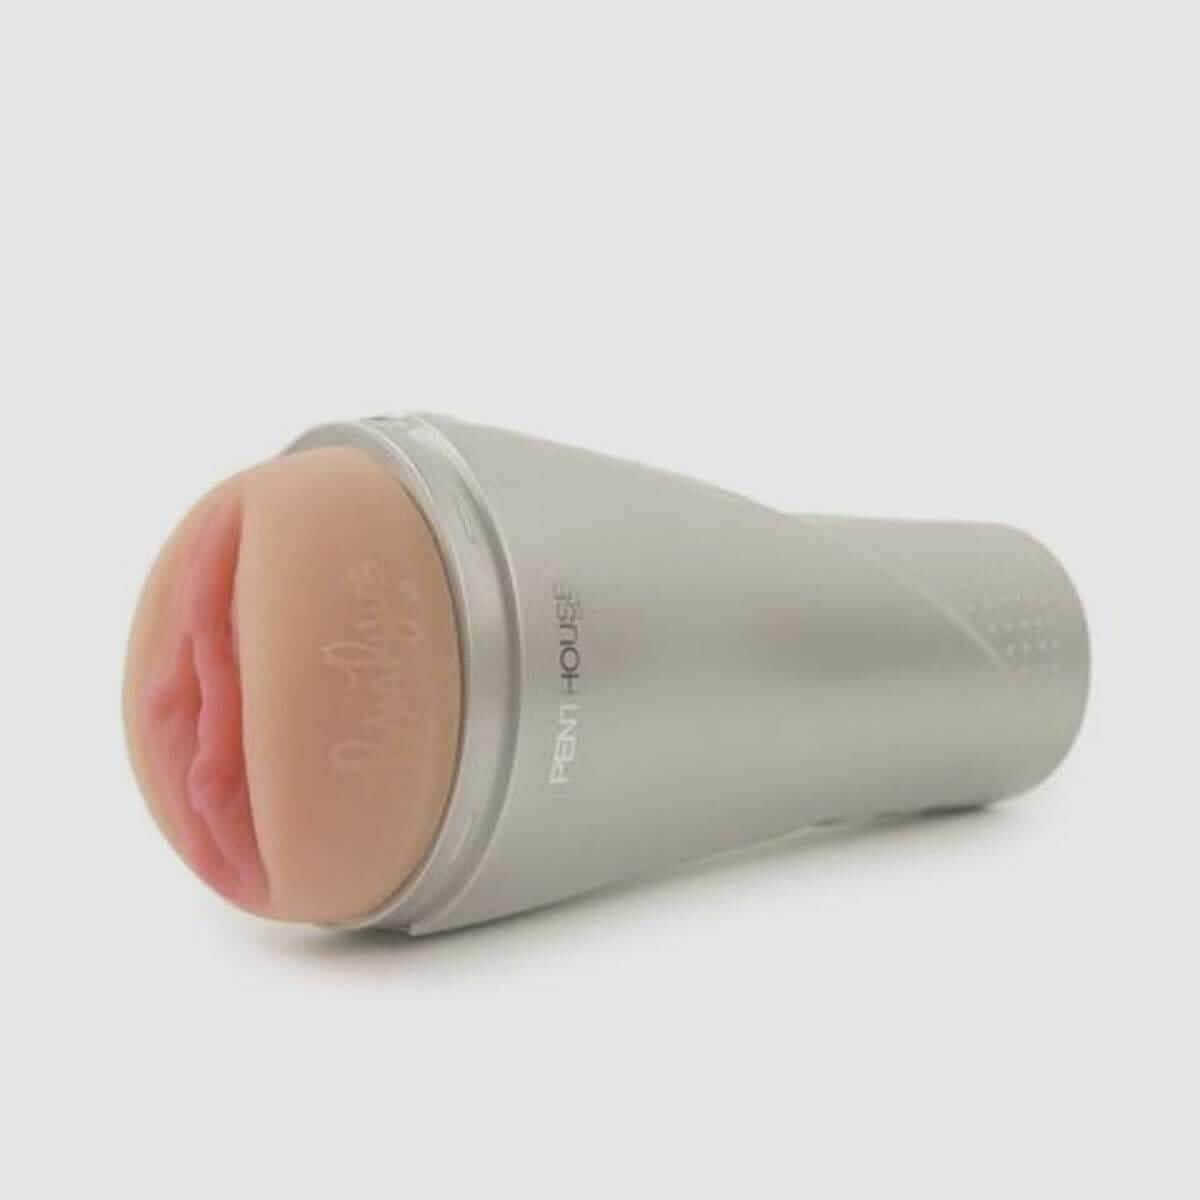 Penthouse® Deluxe CyberSkin® Vibrating Stroker - Ryan Ryans - Thorn & Feather Sex Toy Canada